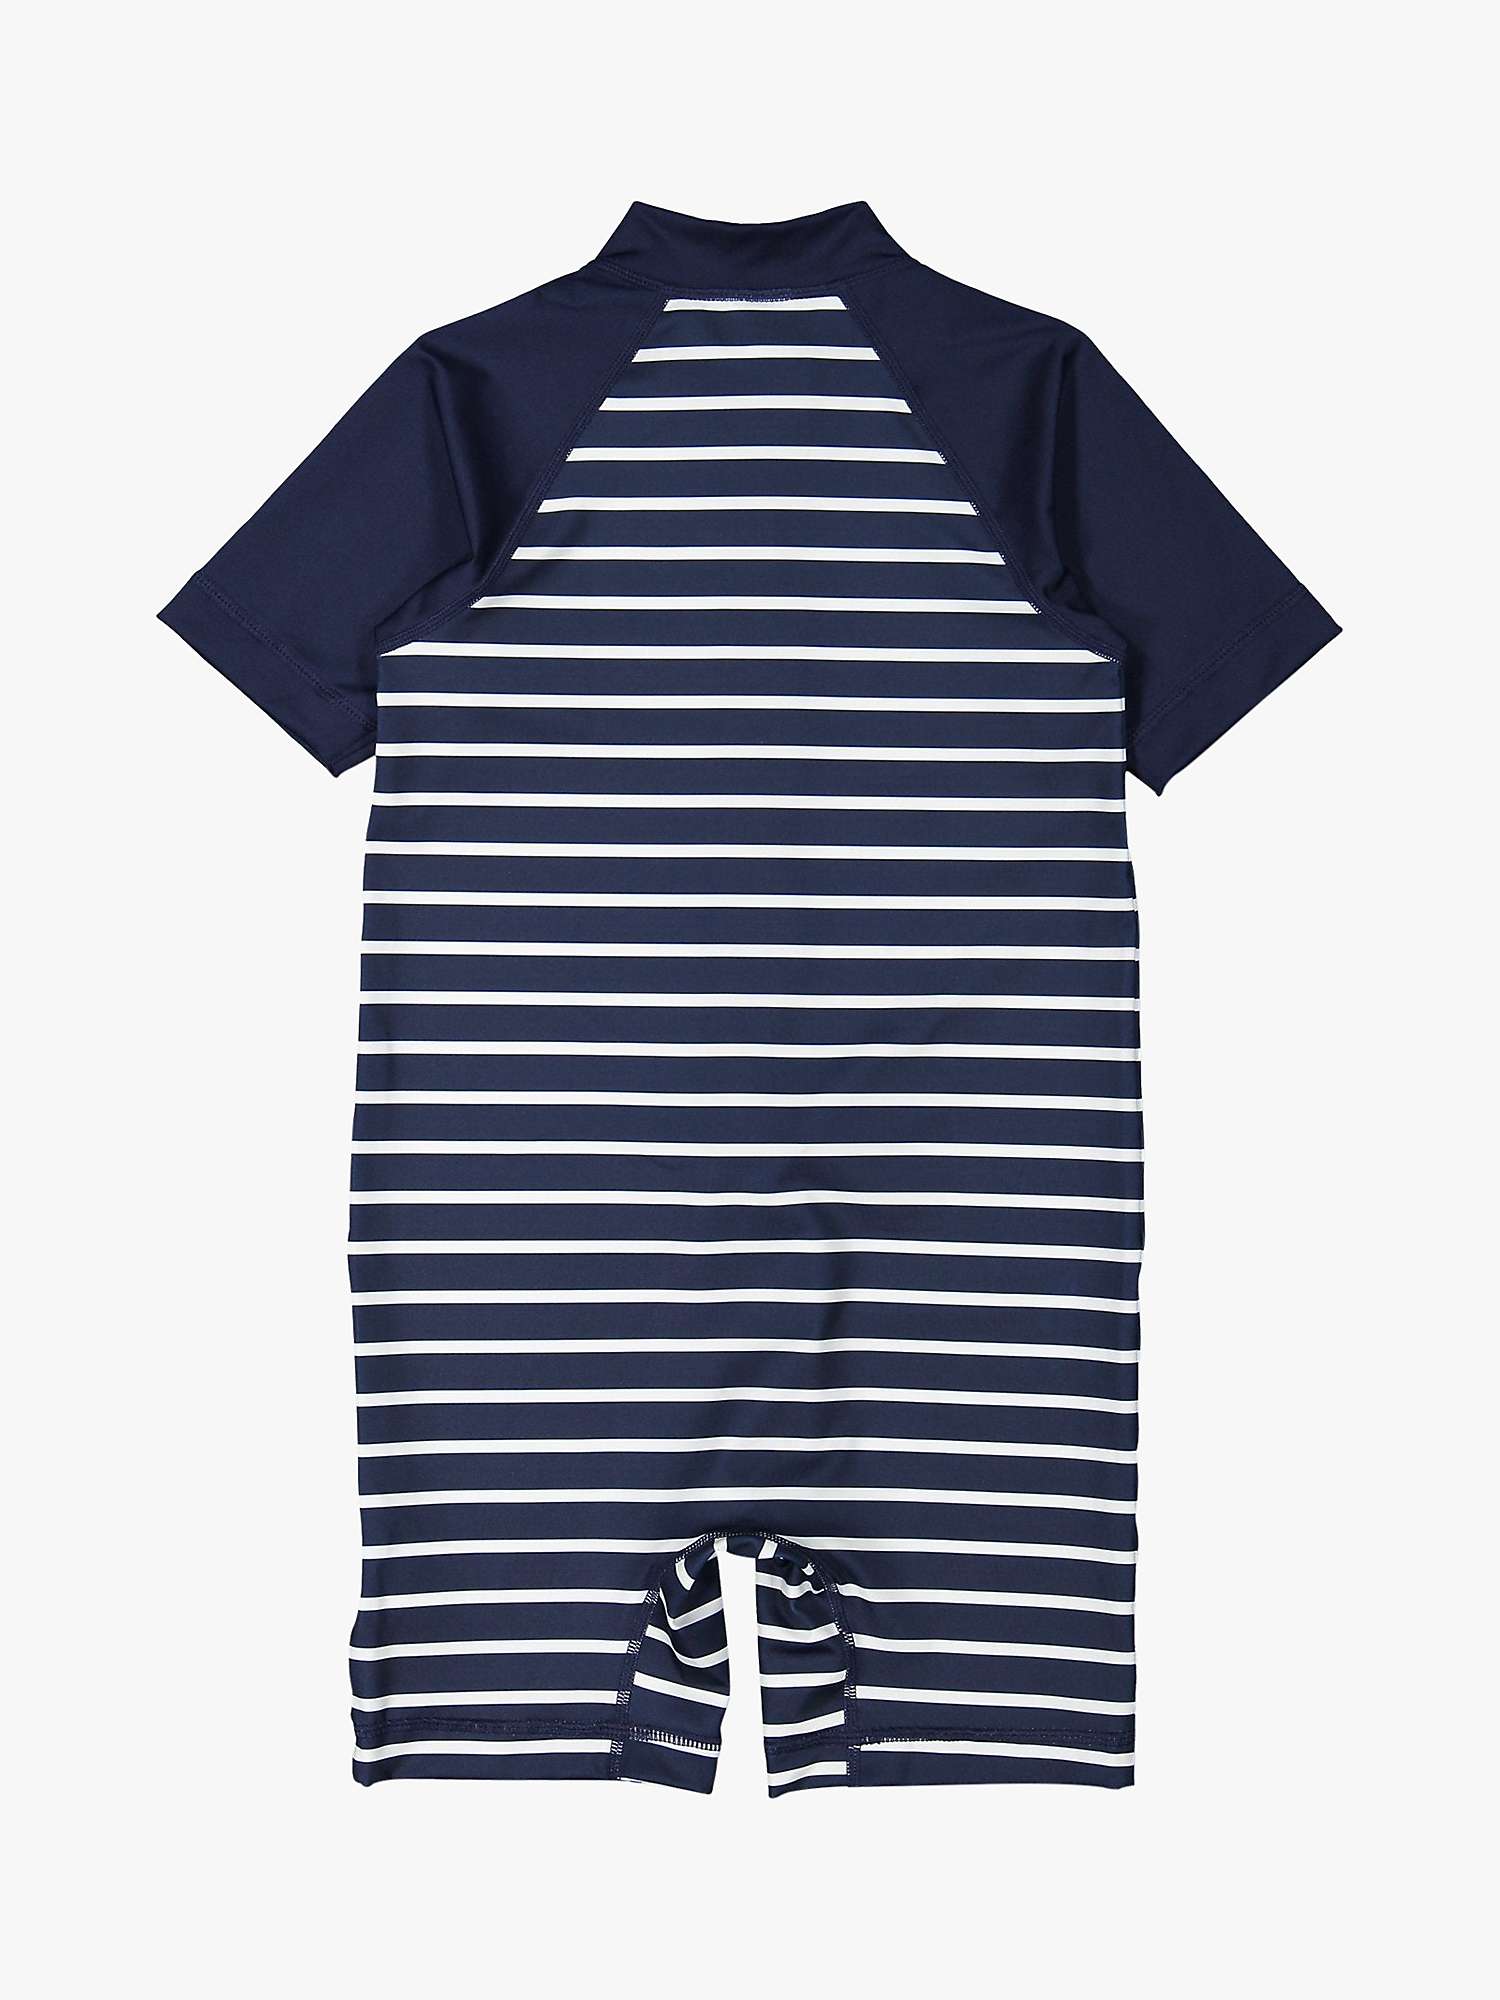 Buy Polarn O. Pyret Kids' Stripe All-In-One Swimsuit, Navy Online at johnlewis.com